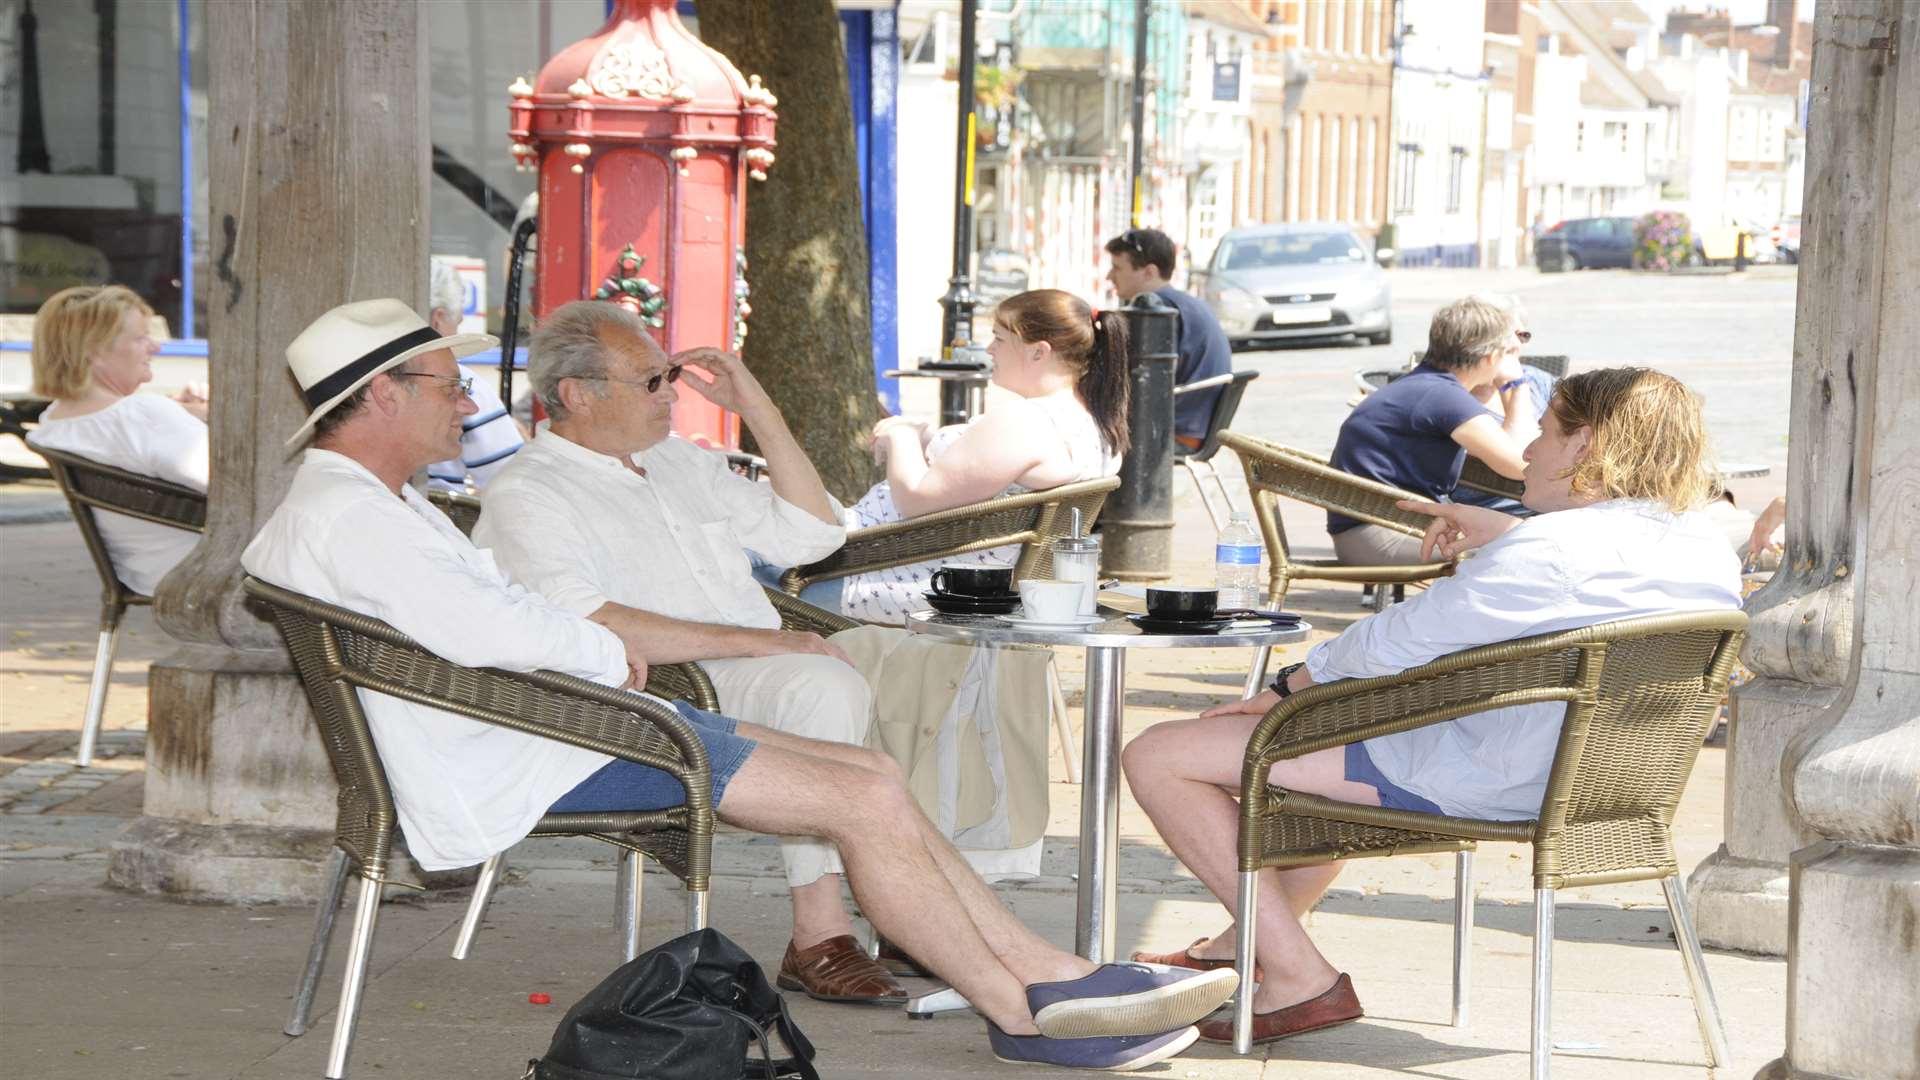 Diners enjoying the good weather in Faversham town centre